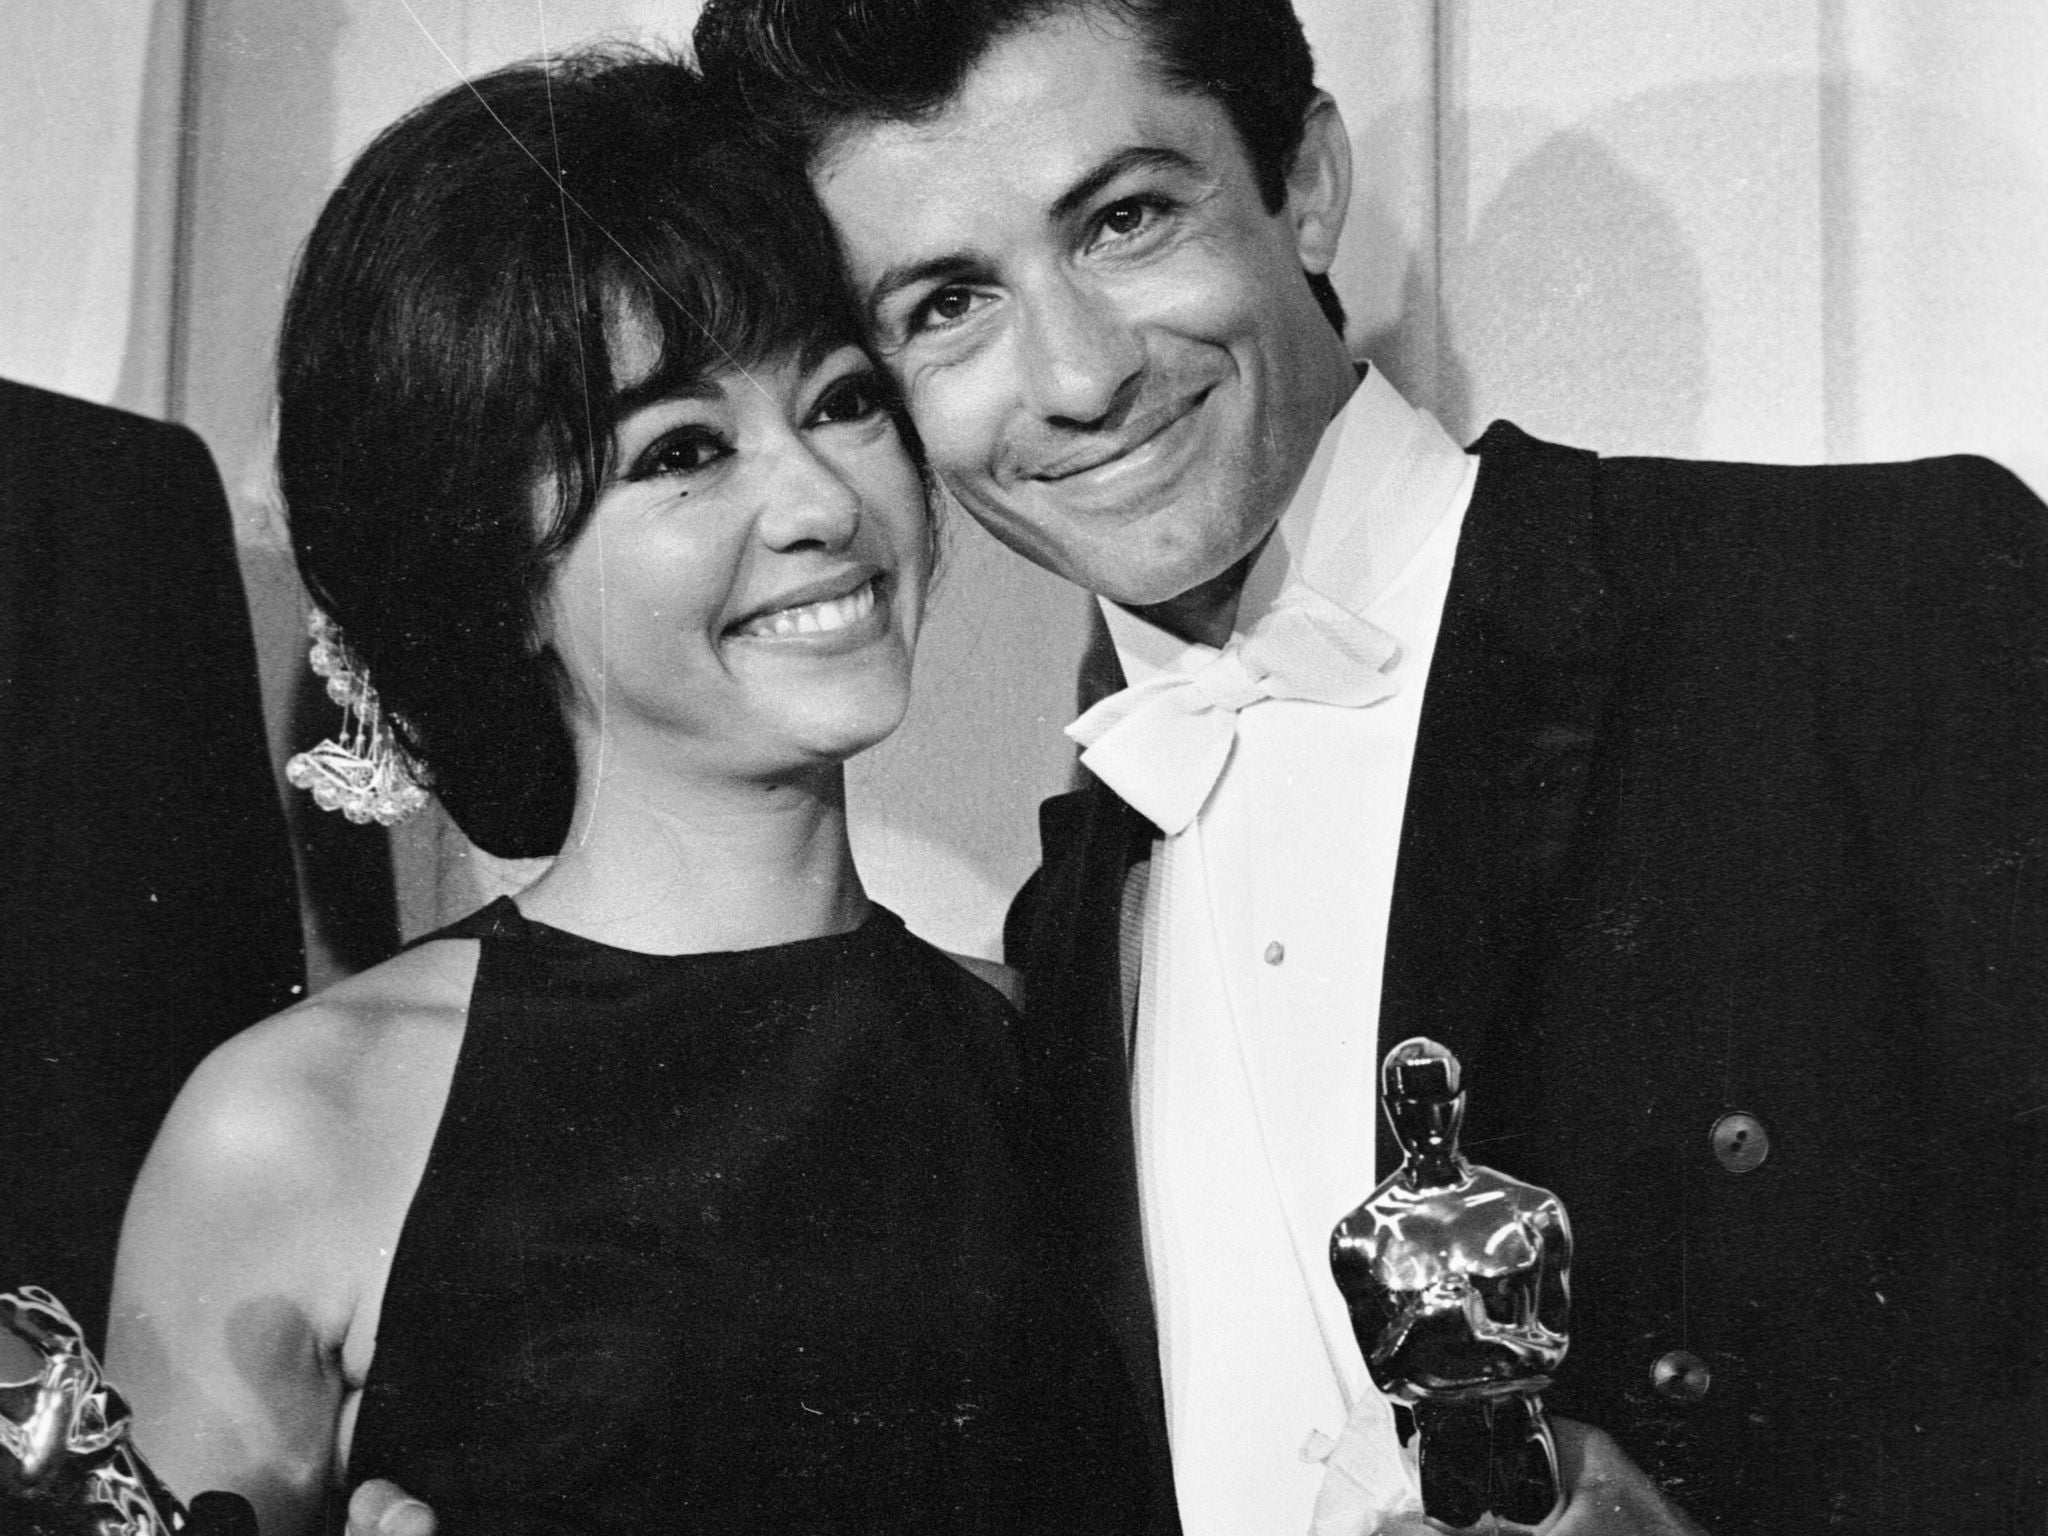 Rita Moreno with ‘West Side Story’ co-star George Chakiris at the Oscars in 1962